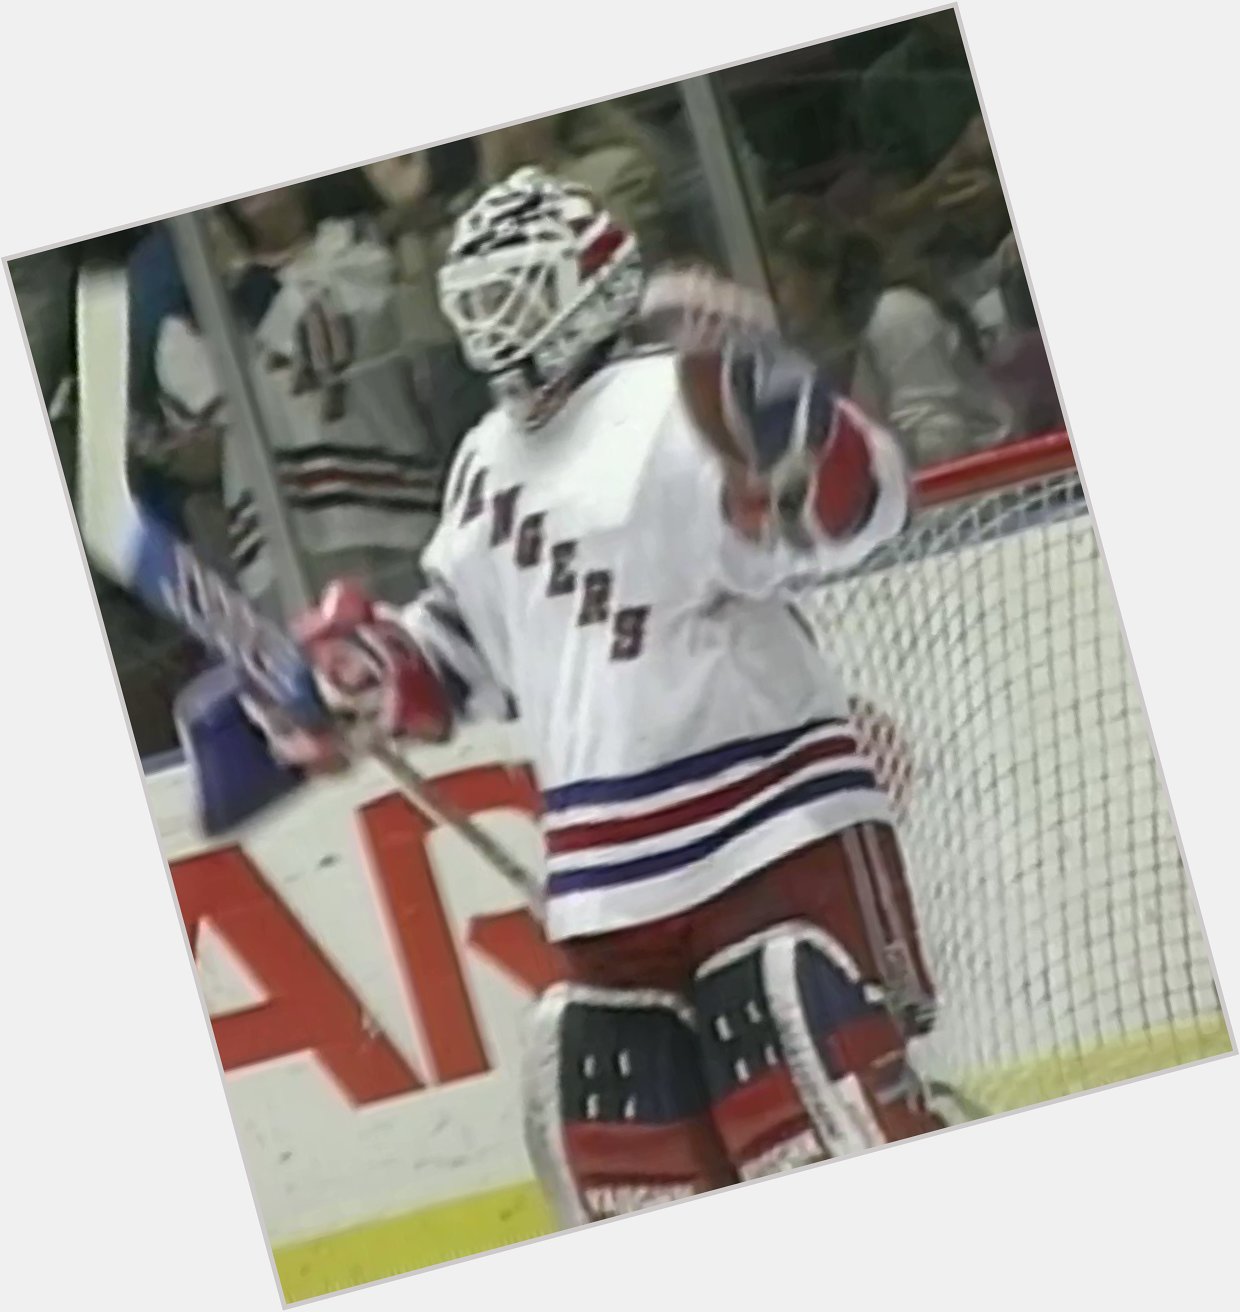 Wishing a Happy Birthday to the legend himself, Mike Richter! 